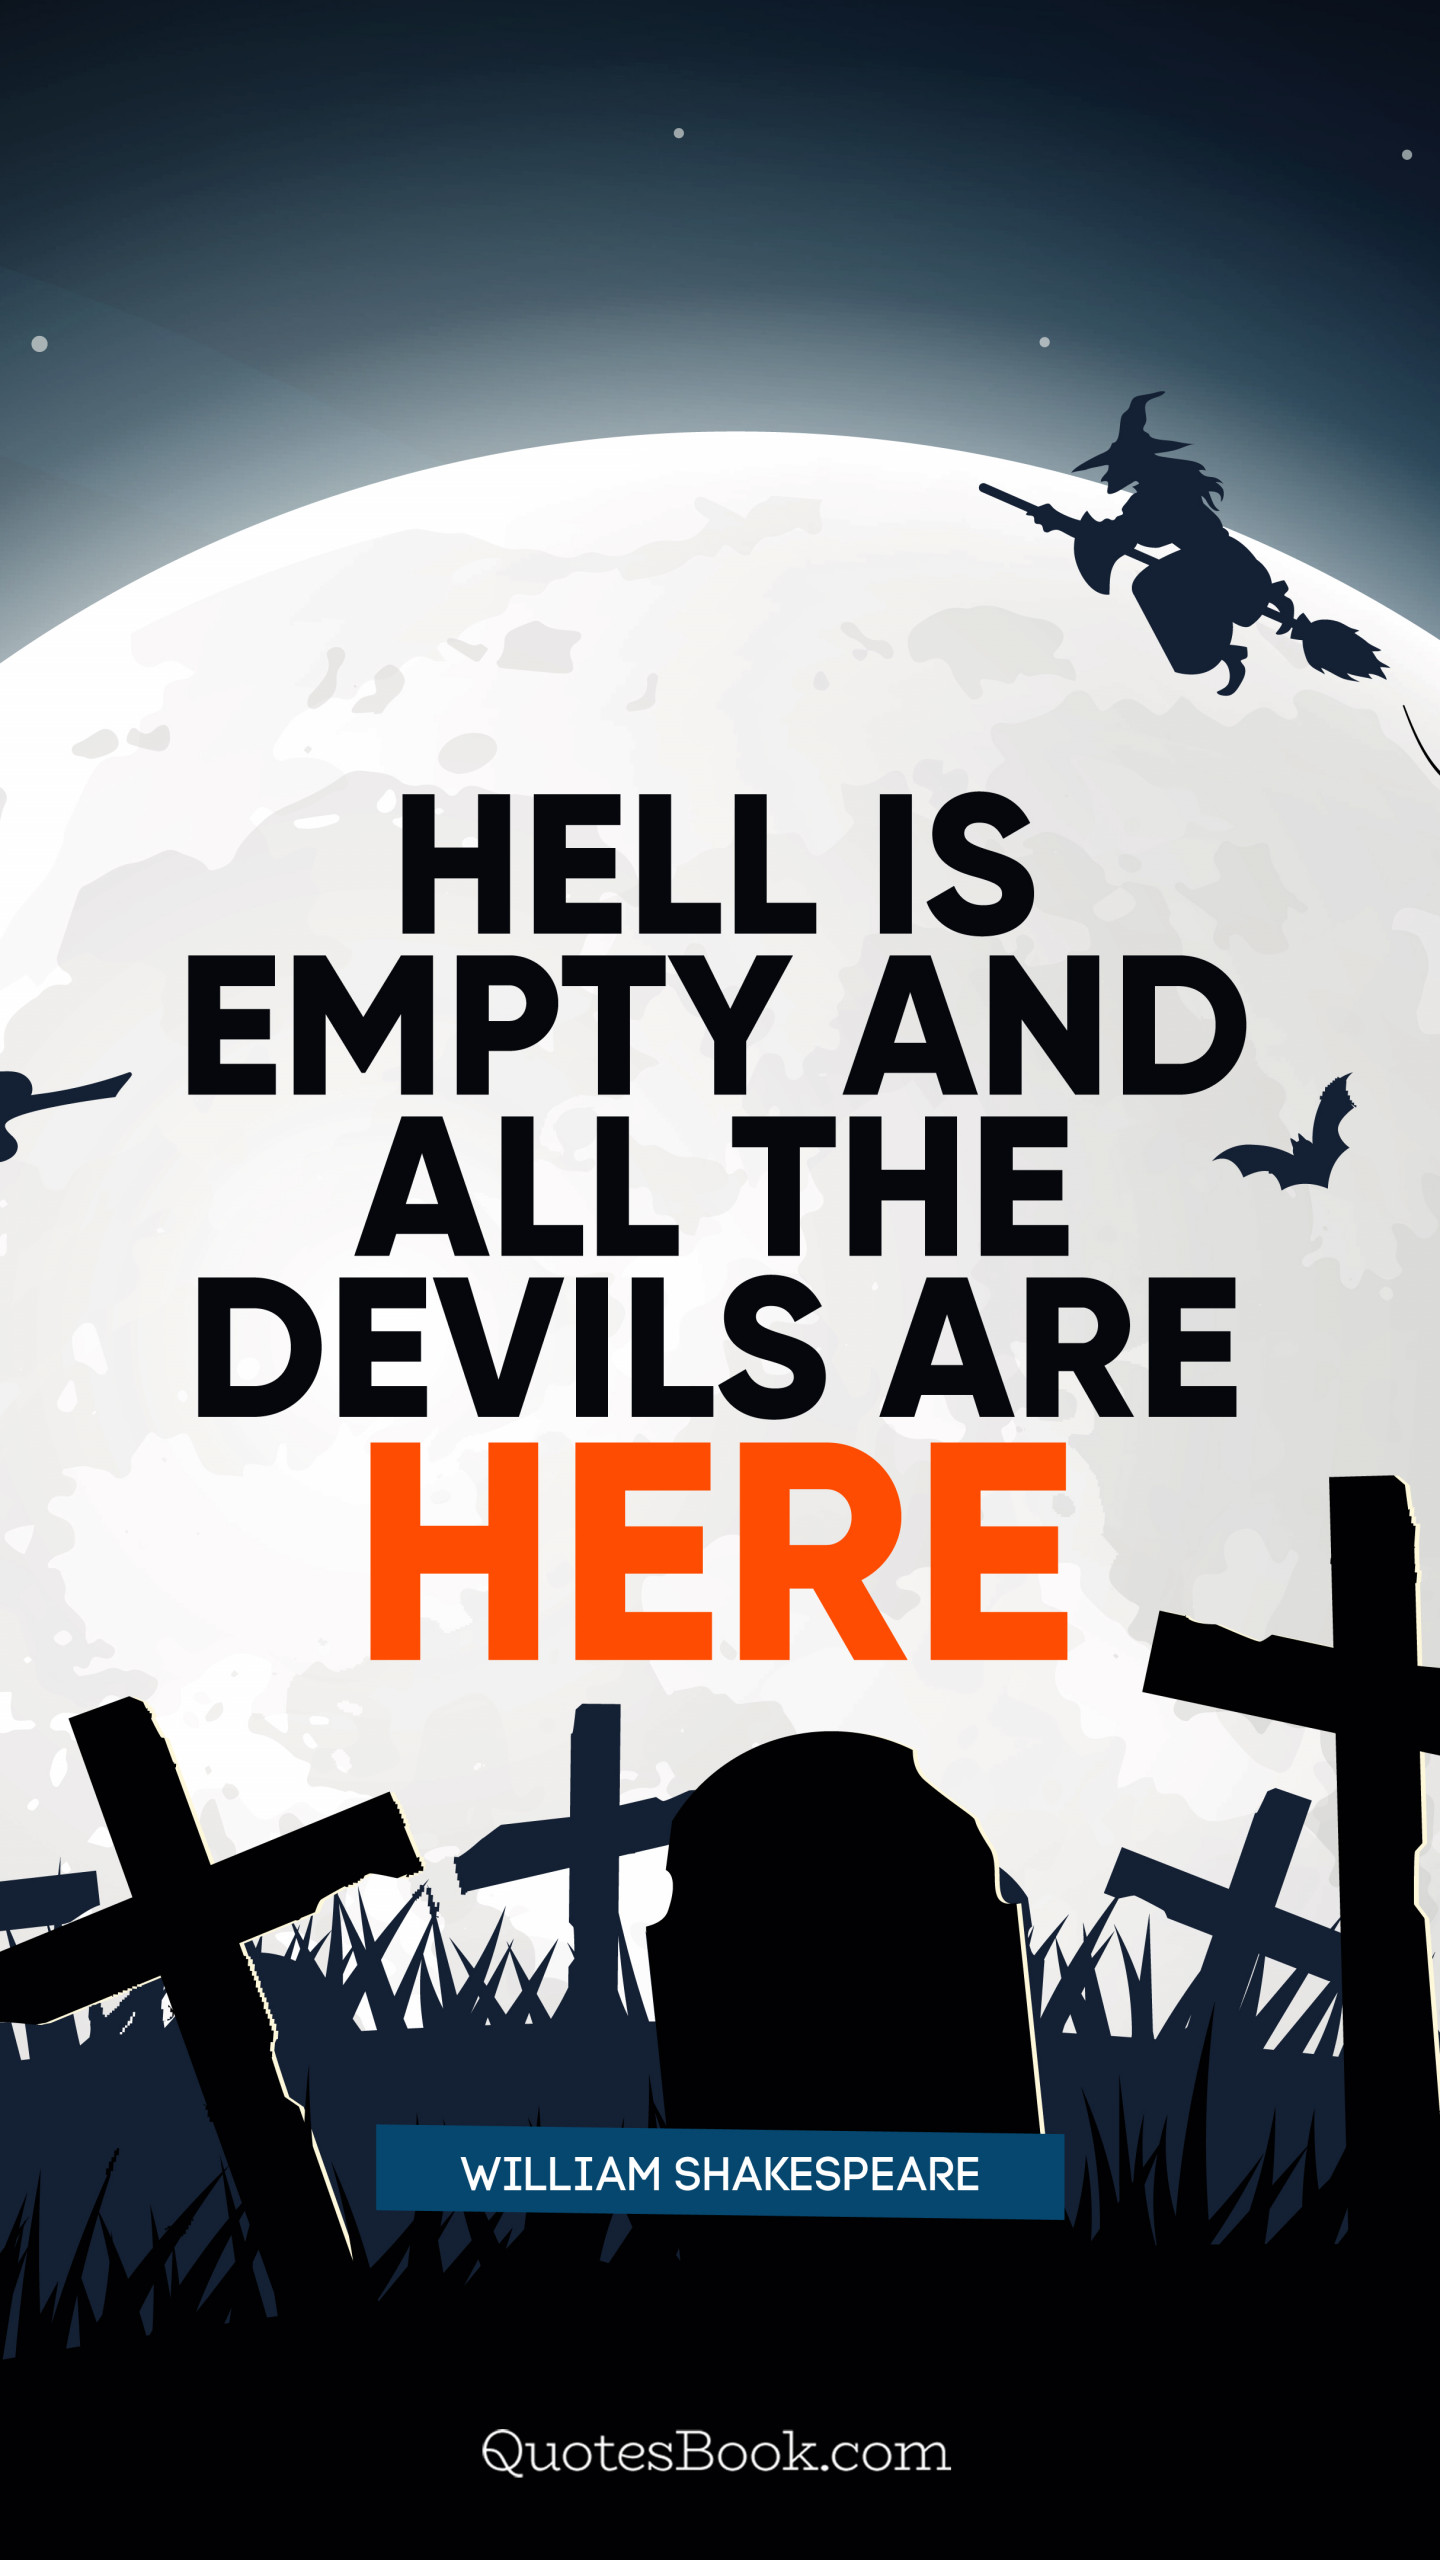 Hell is empty and all the devils are here. - Quote by William